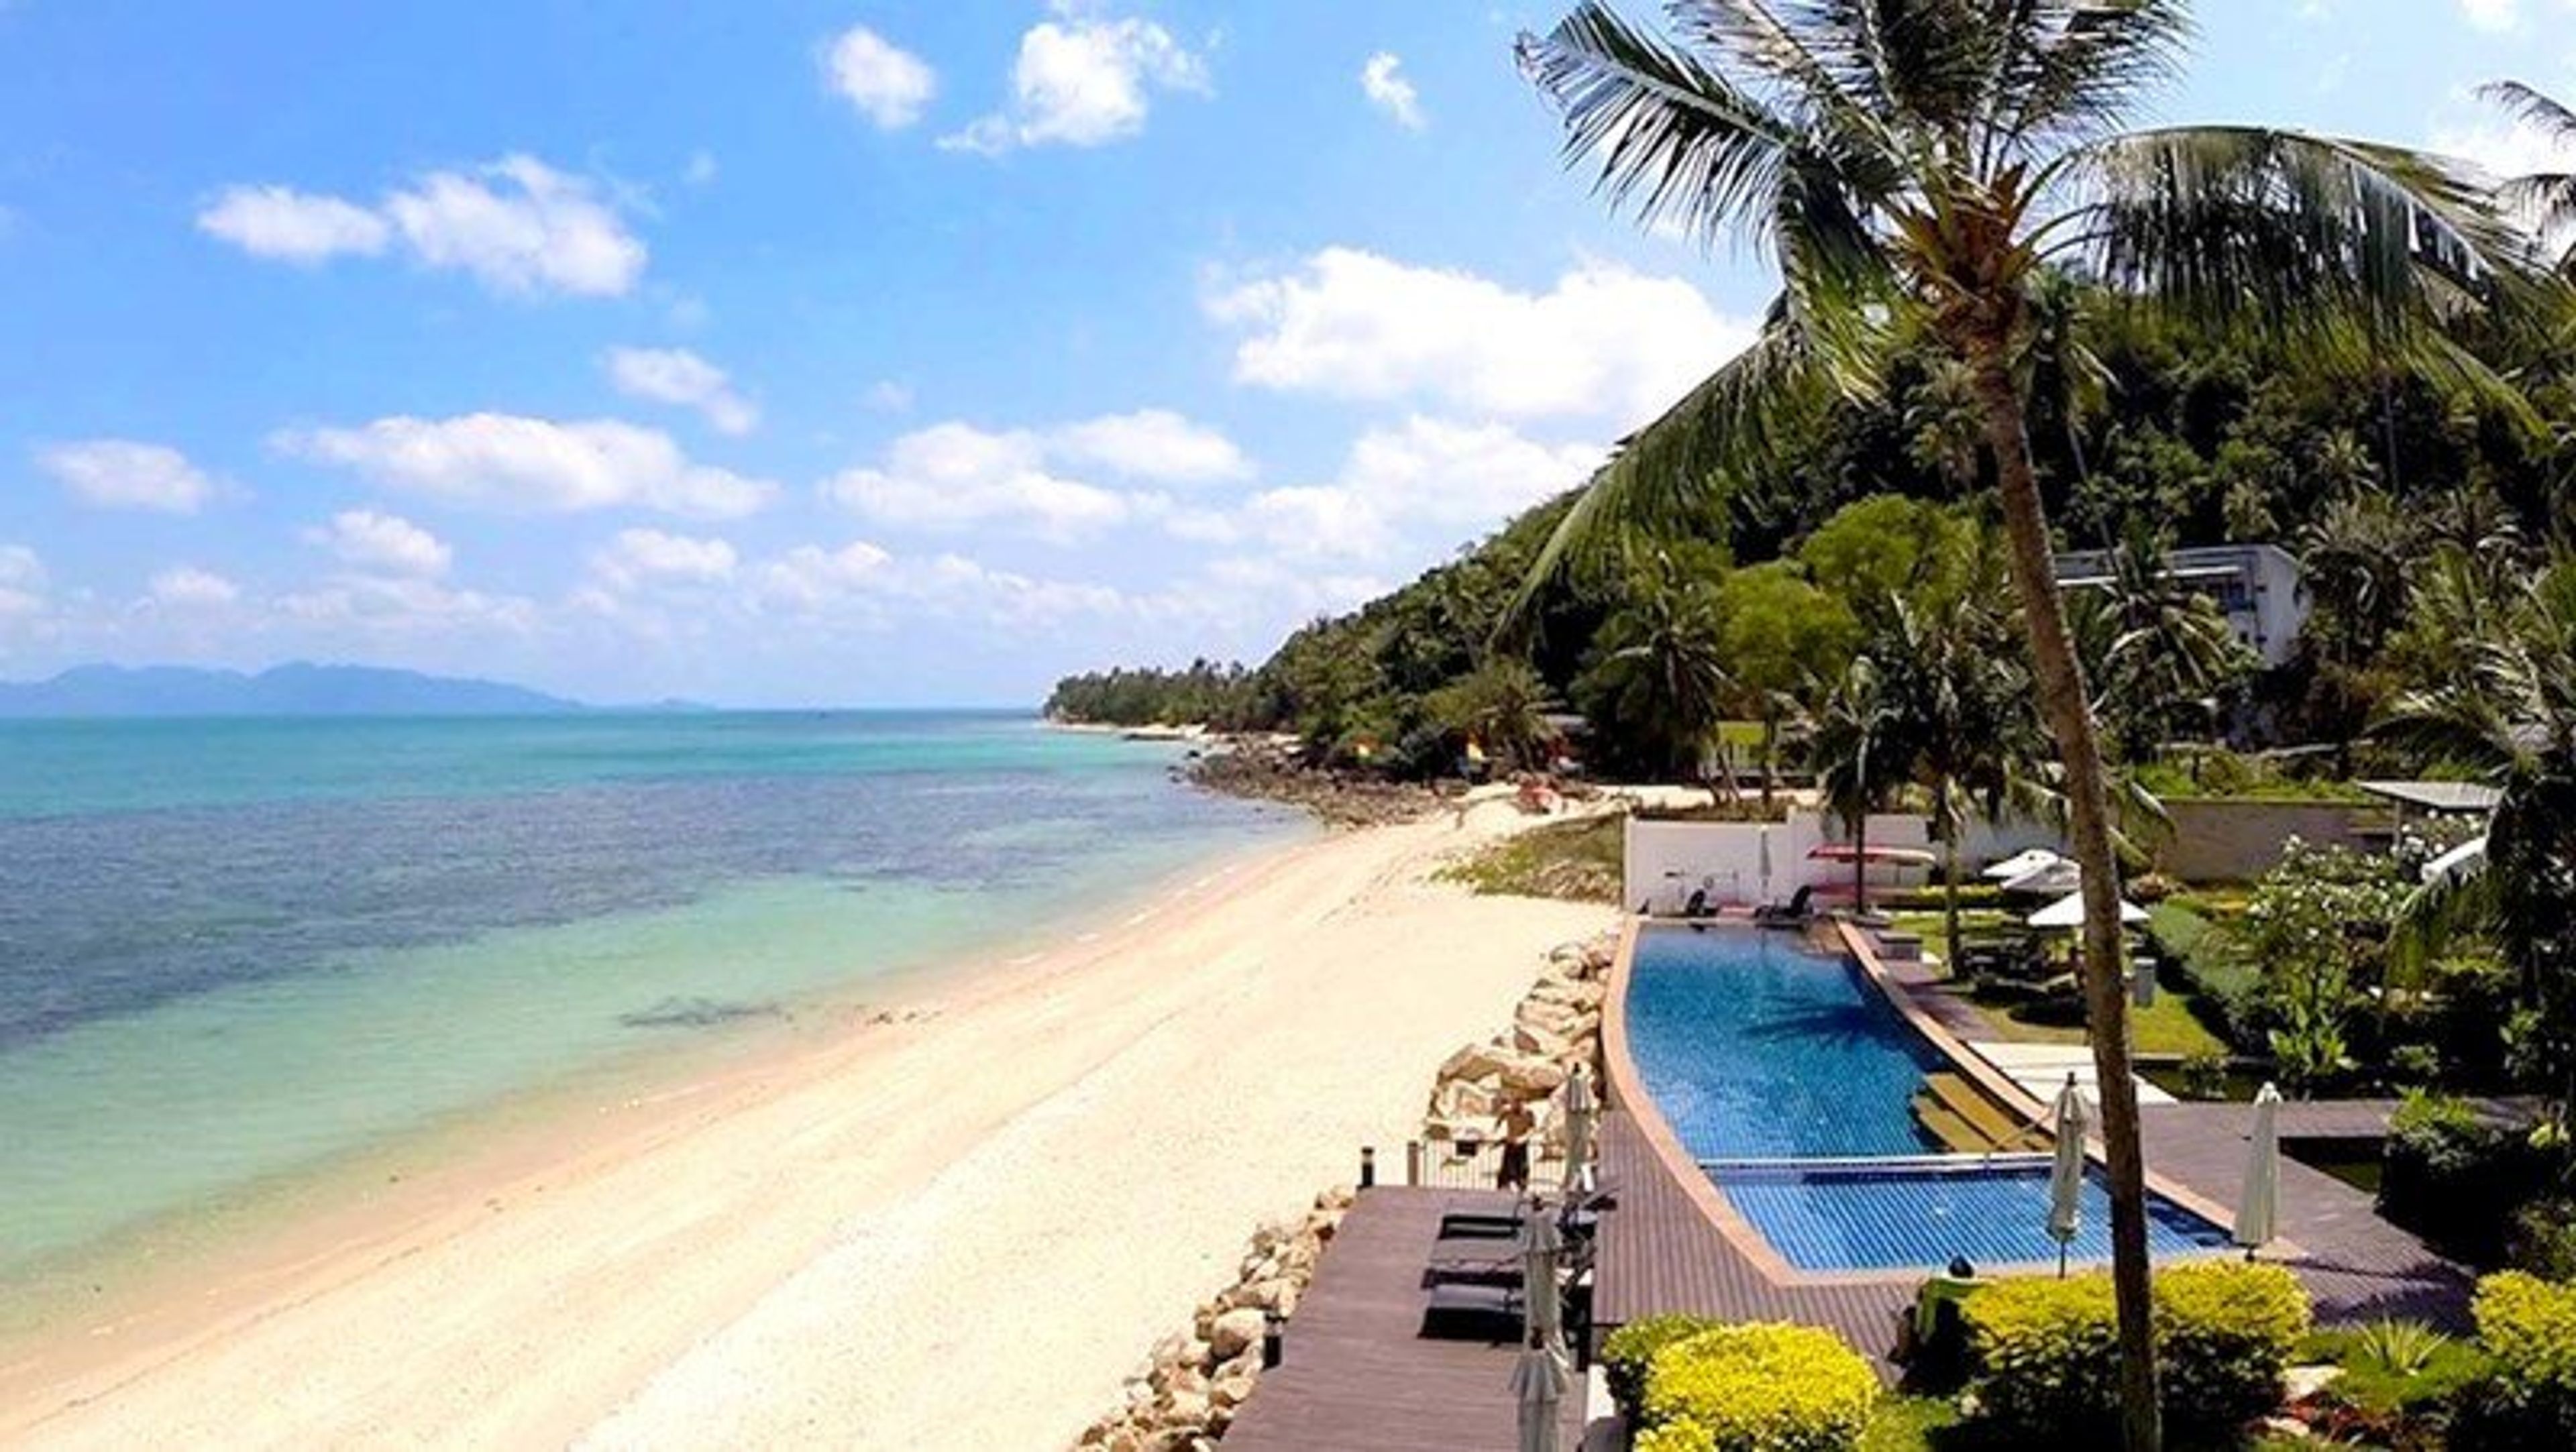 Secluded beach and resort pool are just a minute's walk away